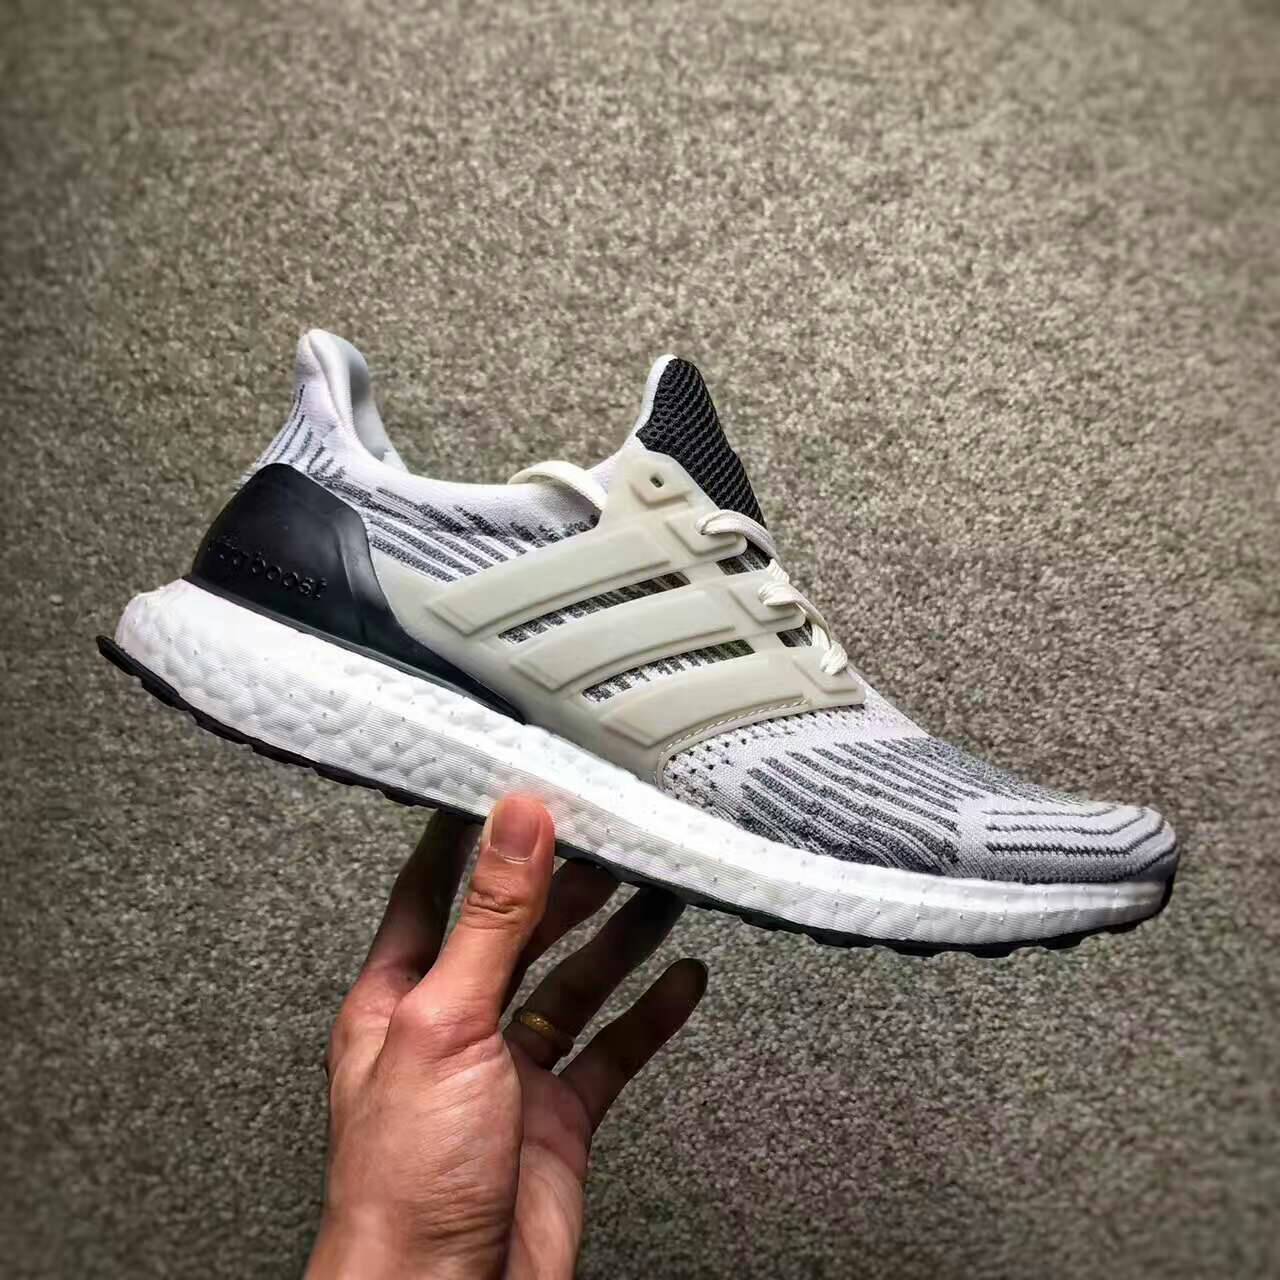 THE ADIDAS ULTRABOOST SNEAKERS YOU YouTube